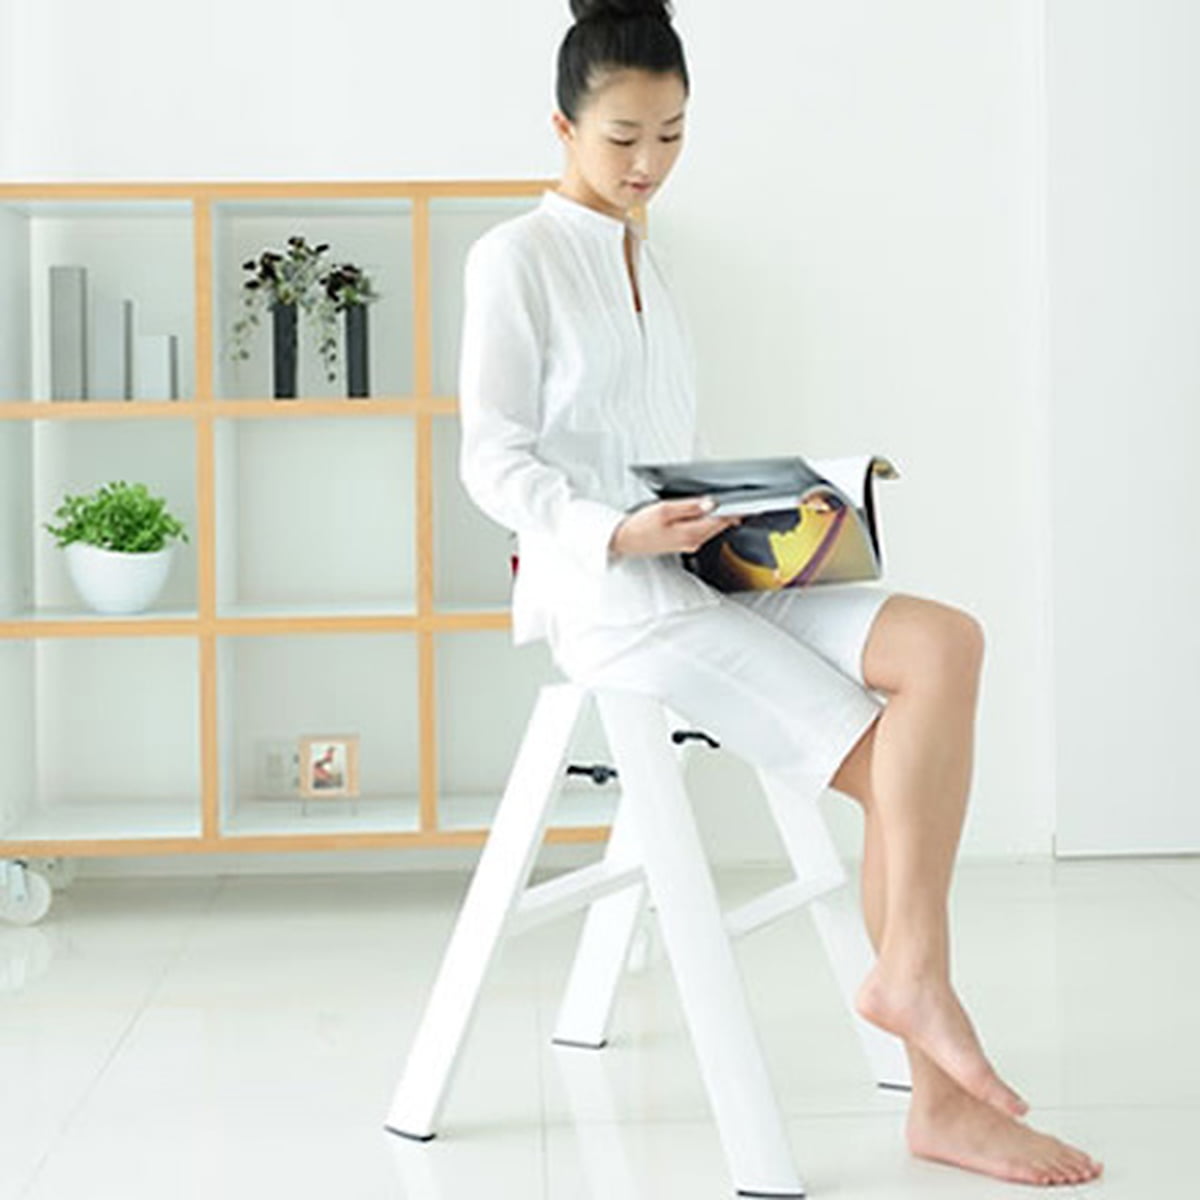 Lucano Metaphys Stepladder by Metphys in the shop